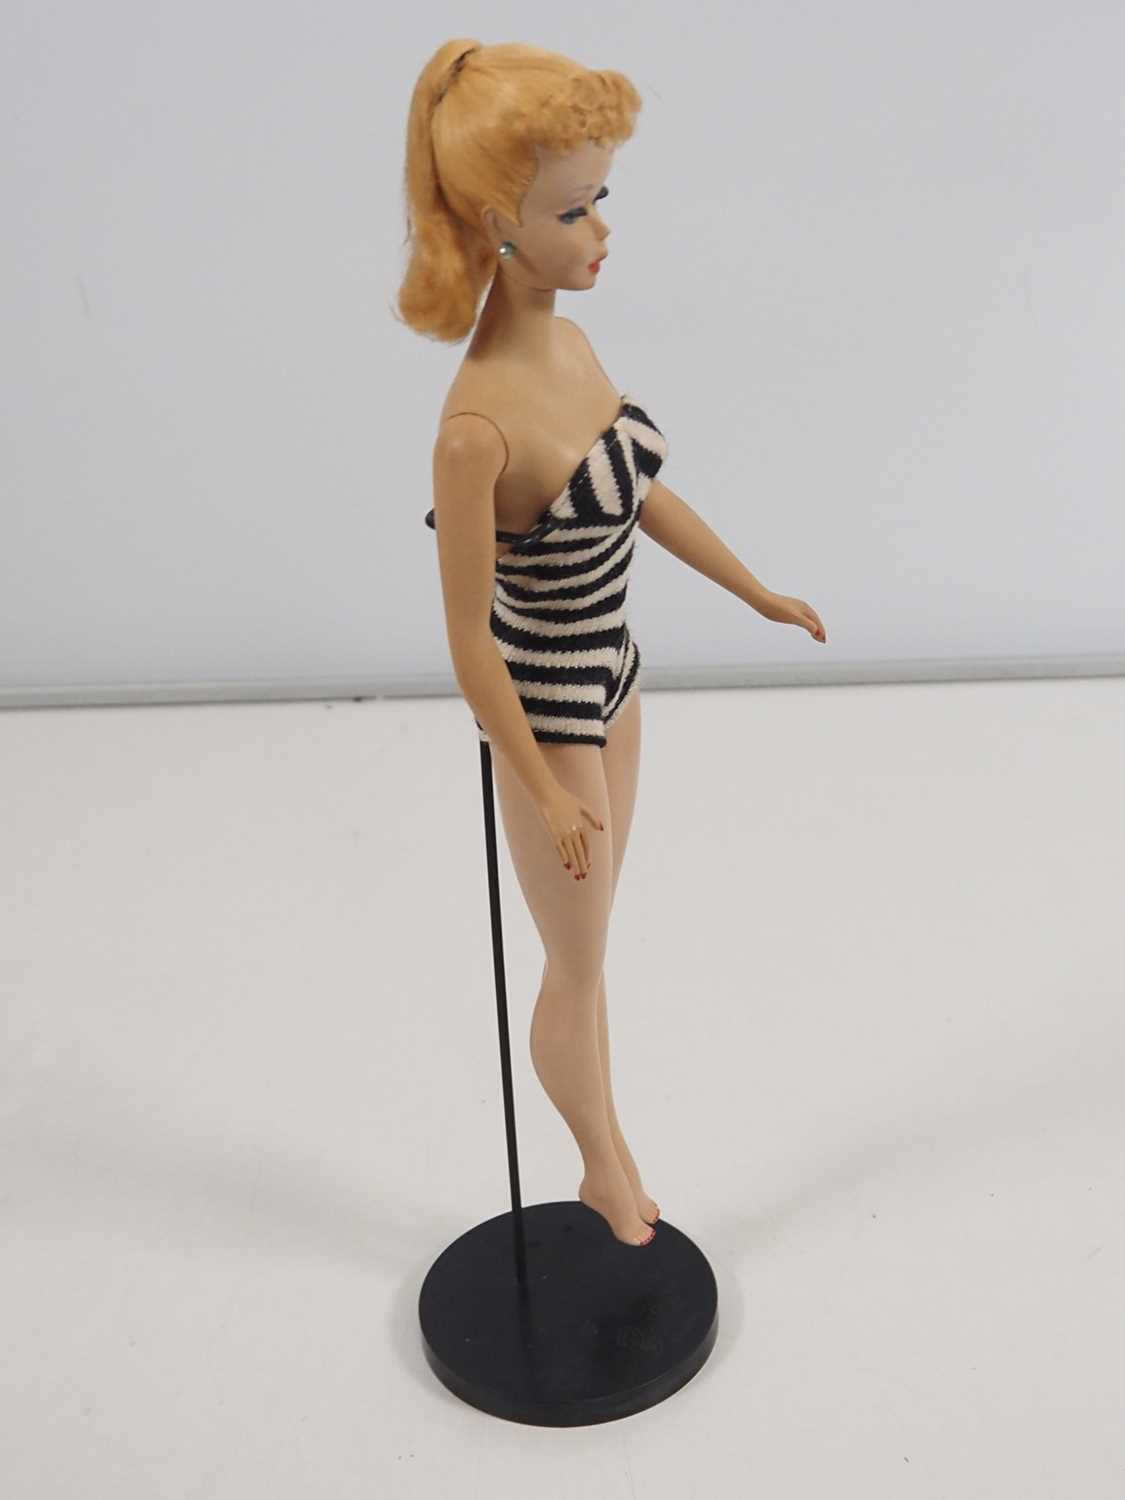 An original vintage MATTEL BARBIE doll, circa 1959/60, complete with swimsuit, mule shoes, - Image 3 of 9